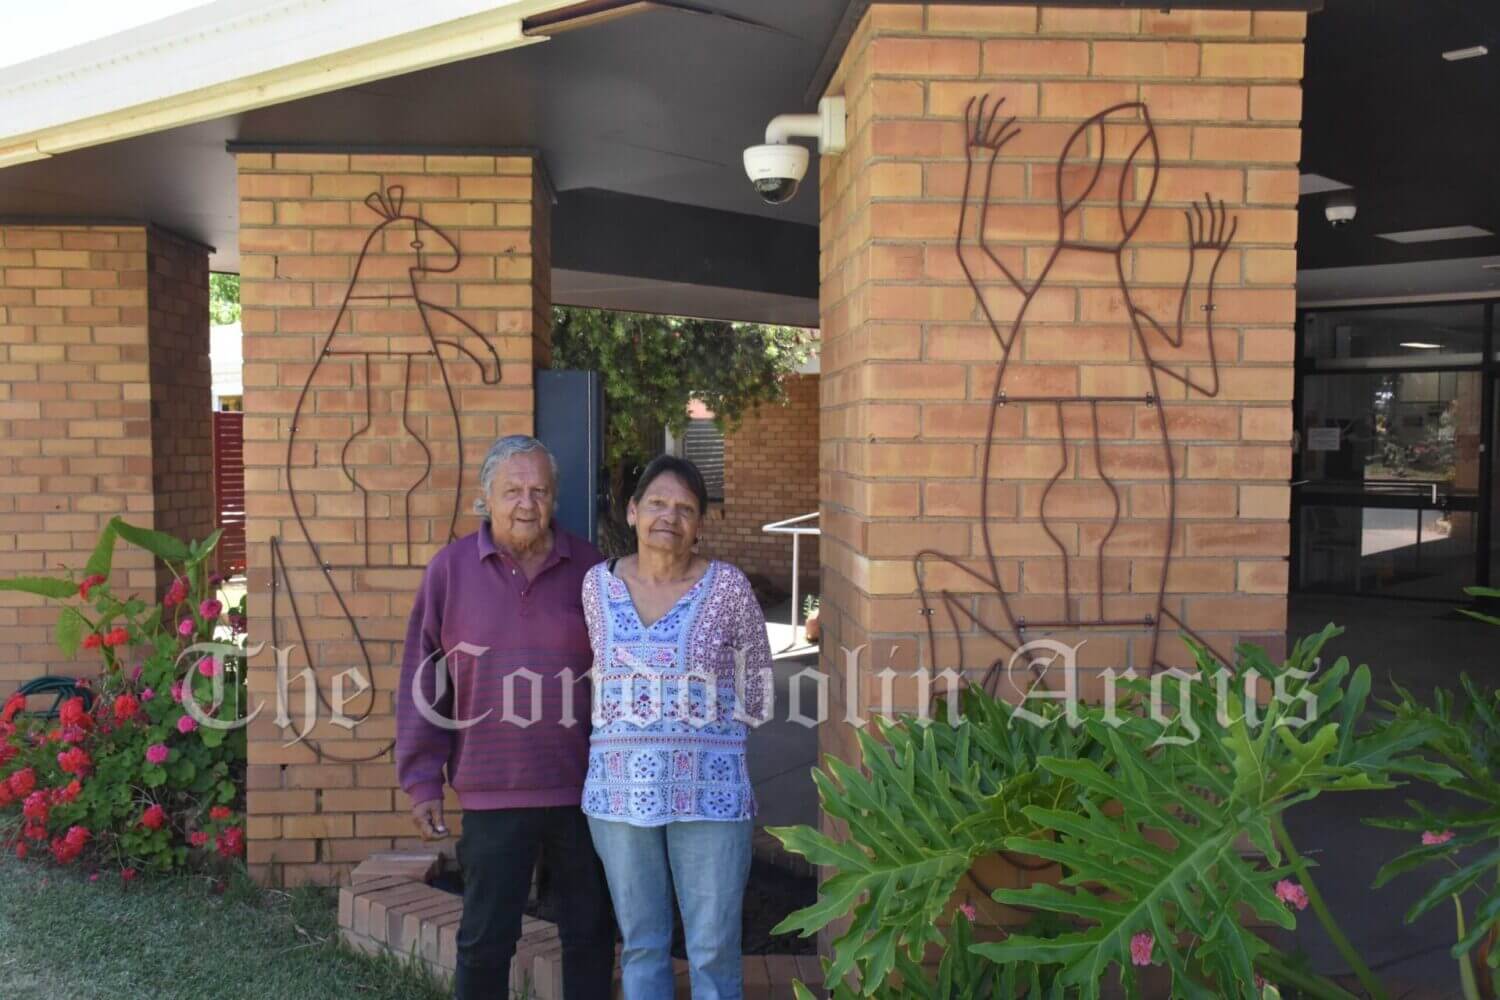 Wiradjuri Artist Bev Coe and Paul Escreet with Wiradjuri Totems, which are part of the new art and signage at the Condobolin Health Service. Bev imagined the overall design, while Paul Escreet helped in the manufacturing of the totems. Image Credit: Melissa Blewitt.